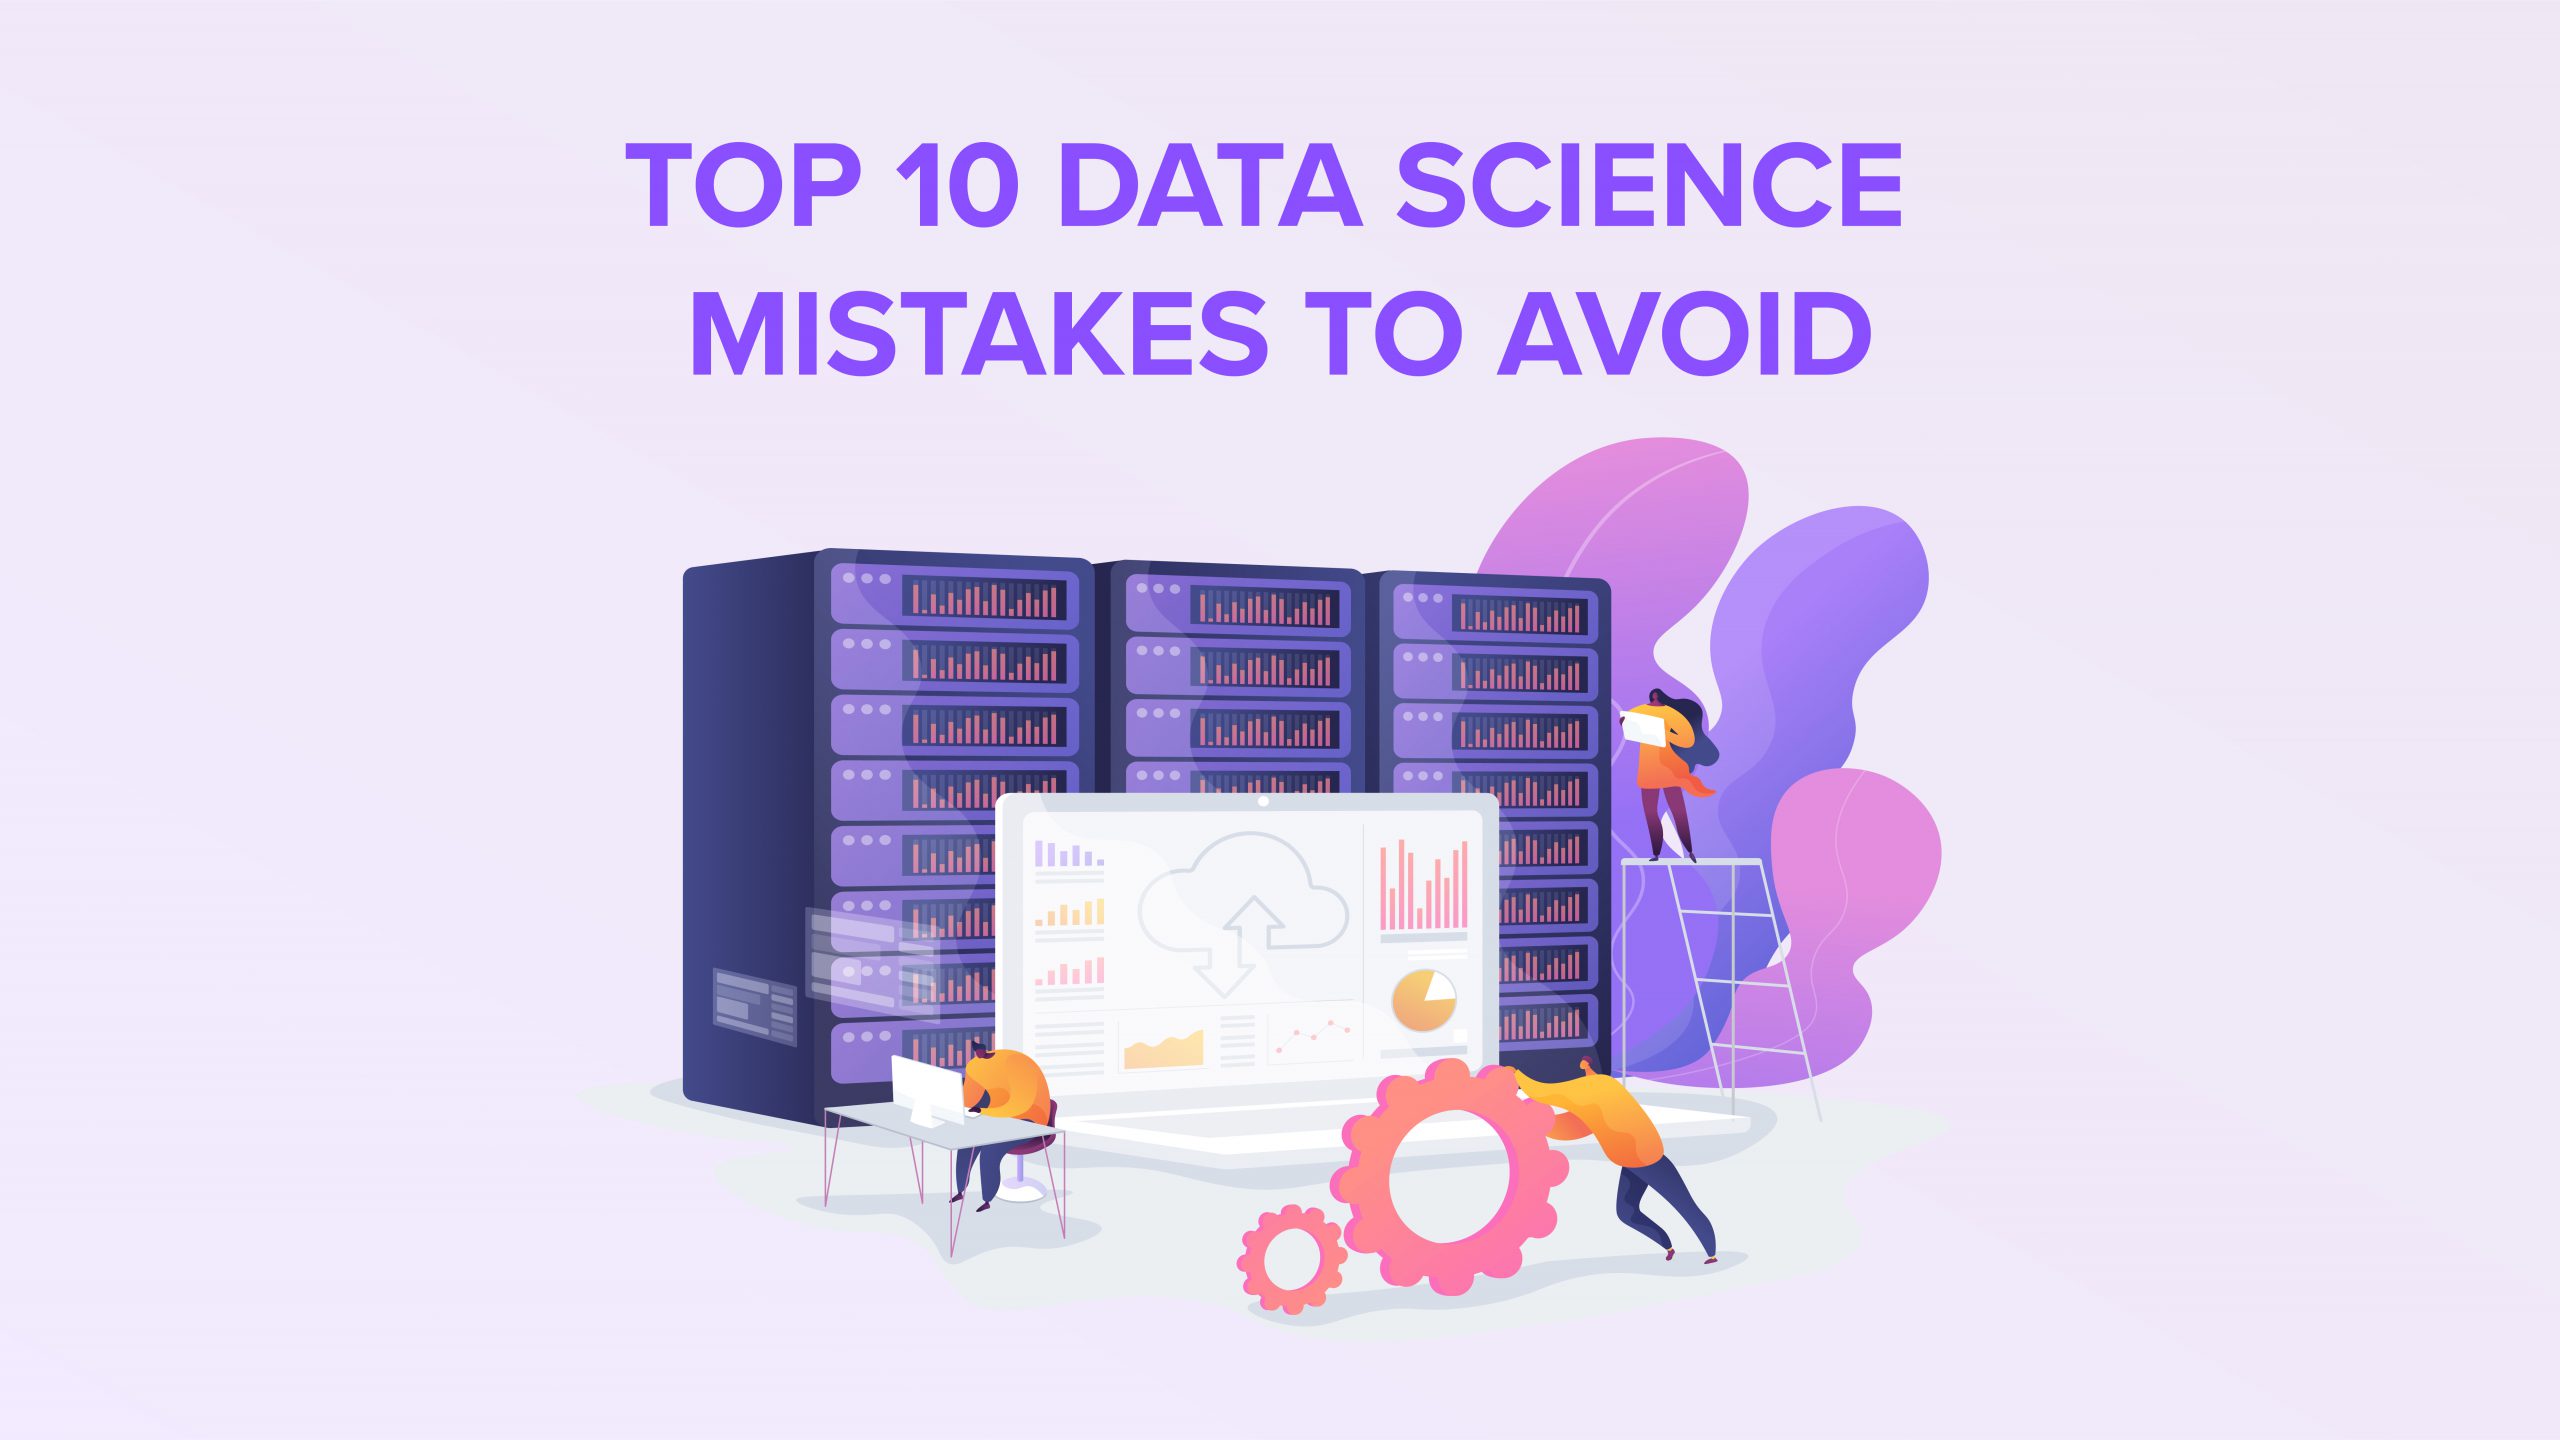 Data science mistakes to avoid